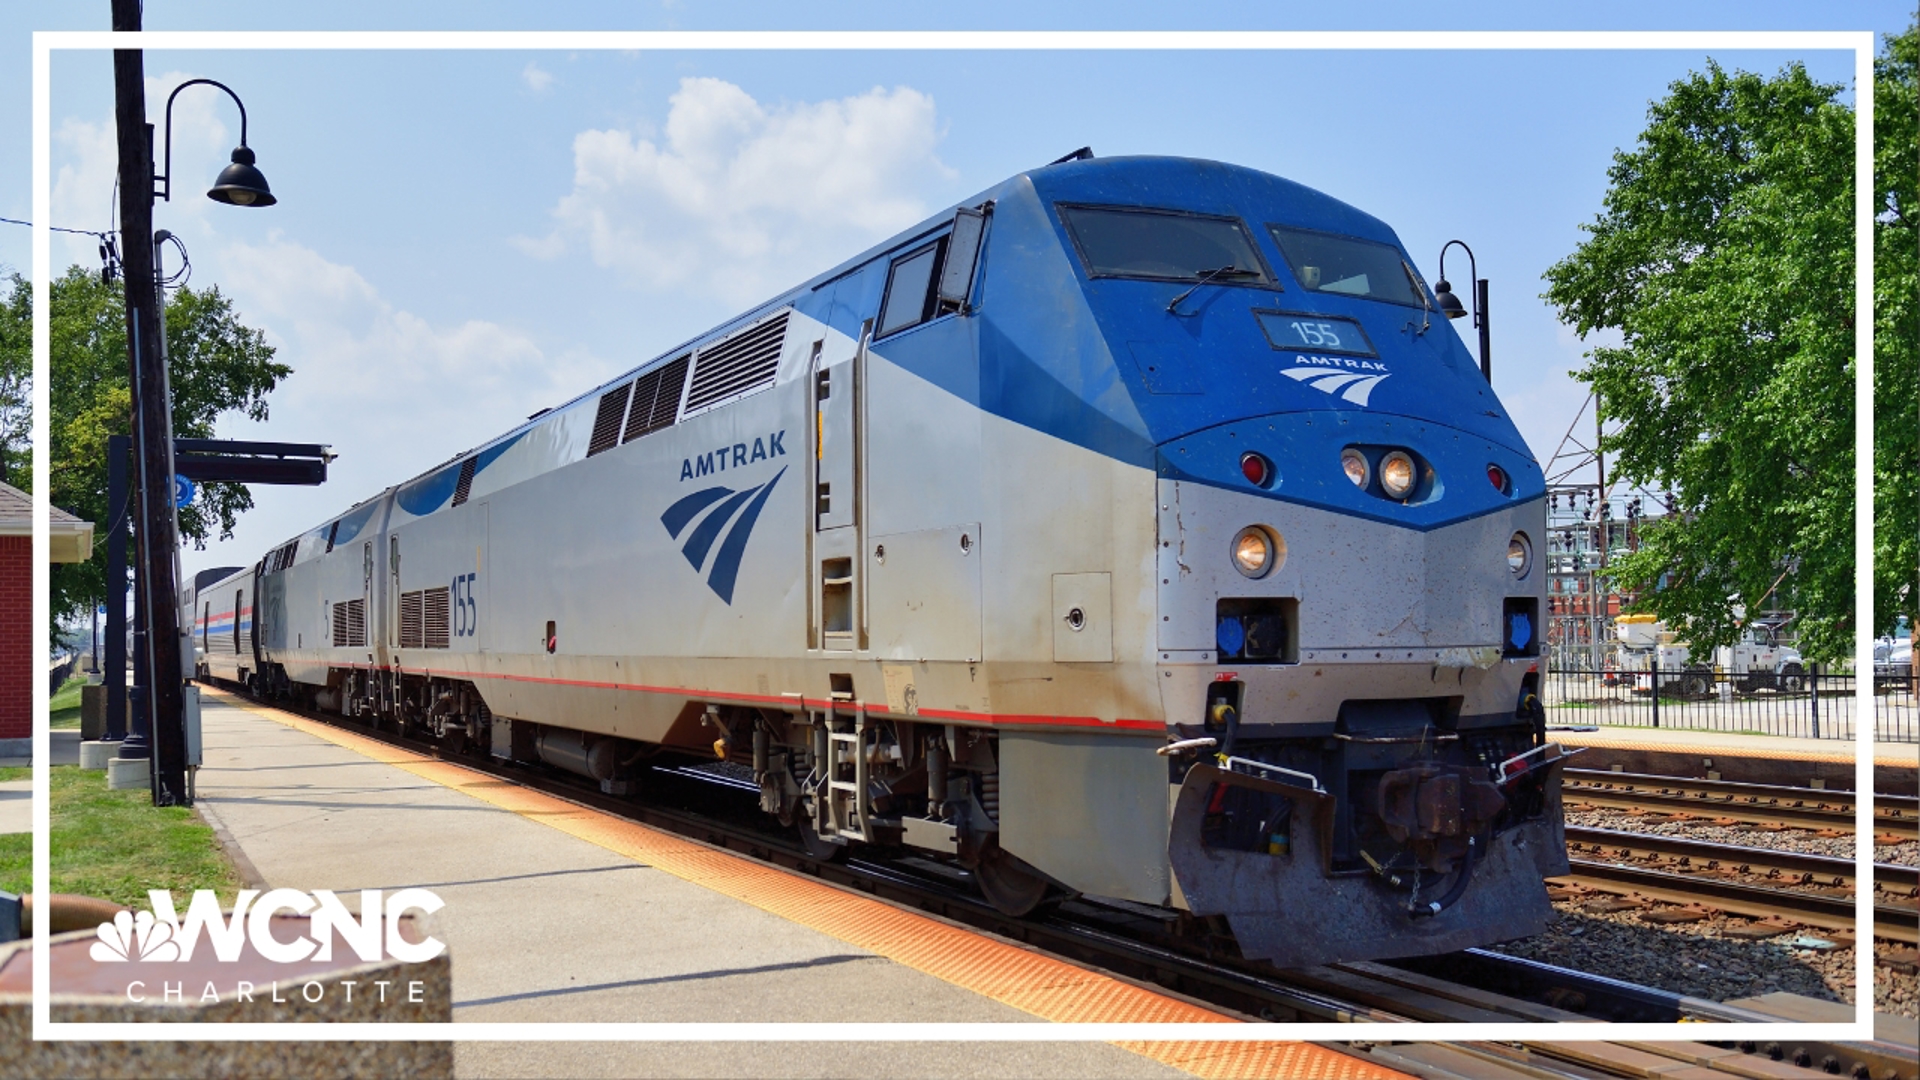 Amtrak train 79 was on its way to Charlotte from New York City.